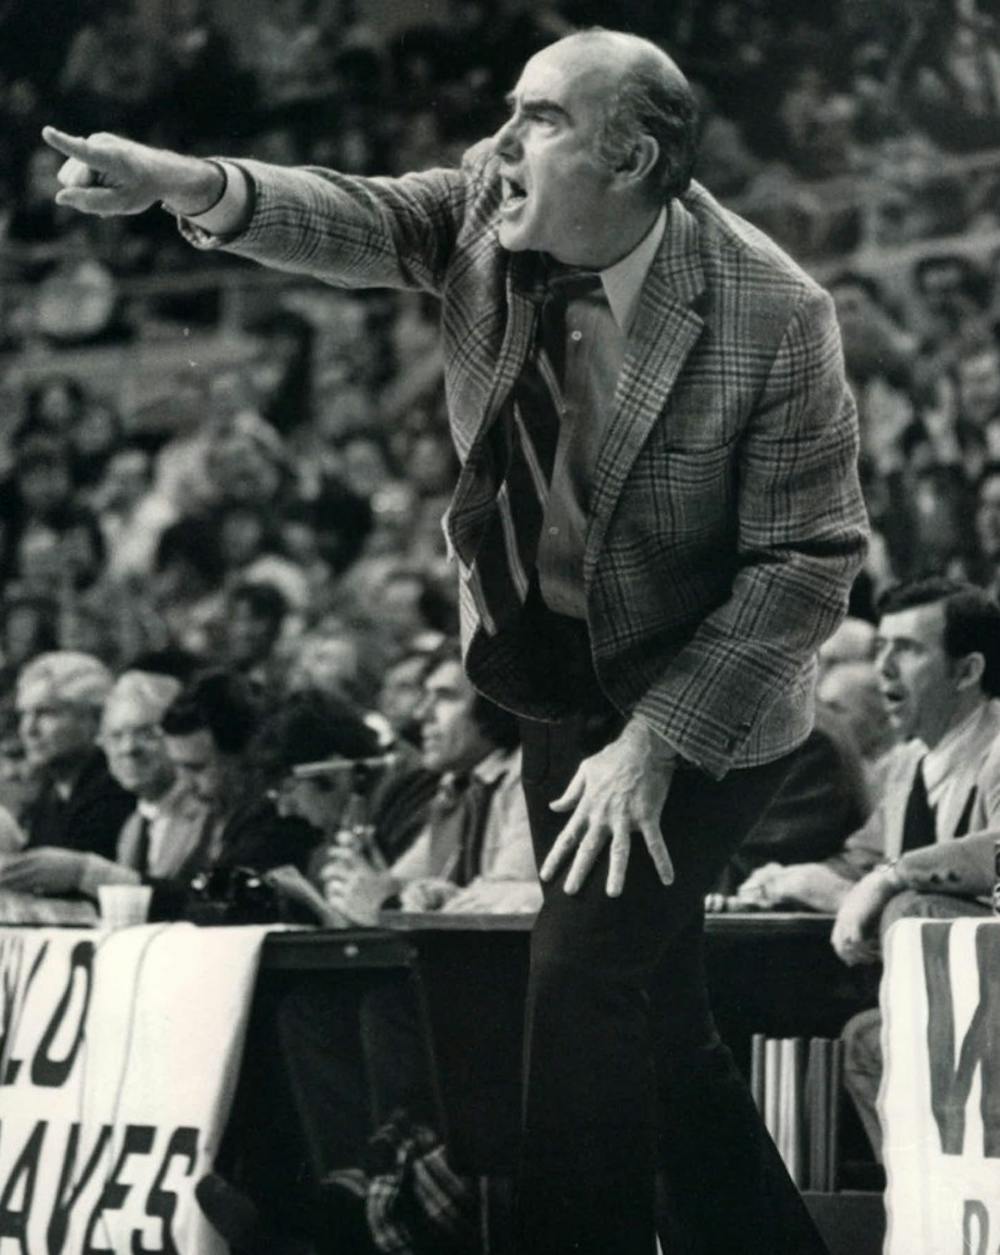 Jack Ramsay, often referred to as Dr. Jack, was born in Philadelphia in 1925 and went on to coach at St. Joe’s, his undergraduate alma mater, and led the Portland Trail Blazers to the 1977 title.